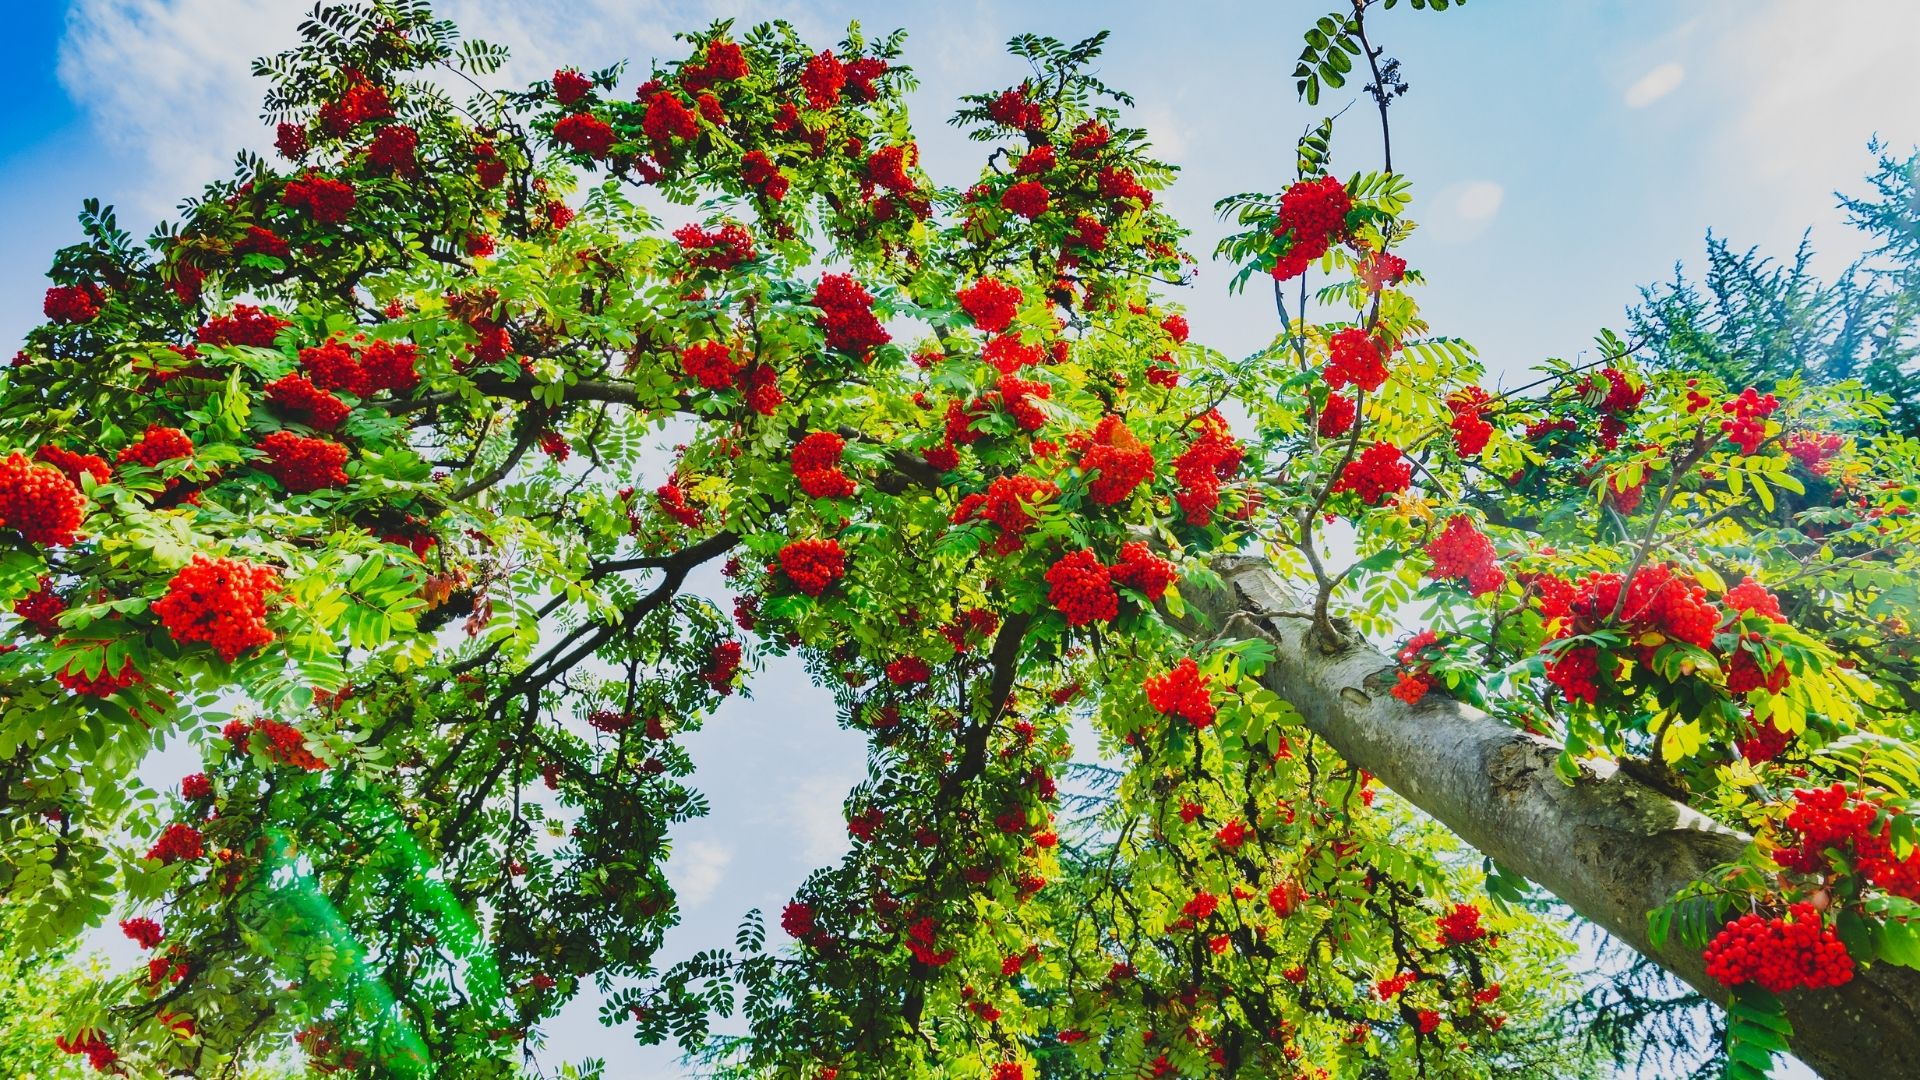 The Rowan tree with its bright red berries is one of the most popular choices when people plant a tree in memory of someone